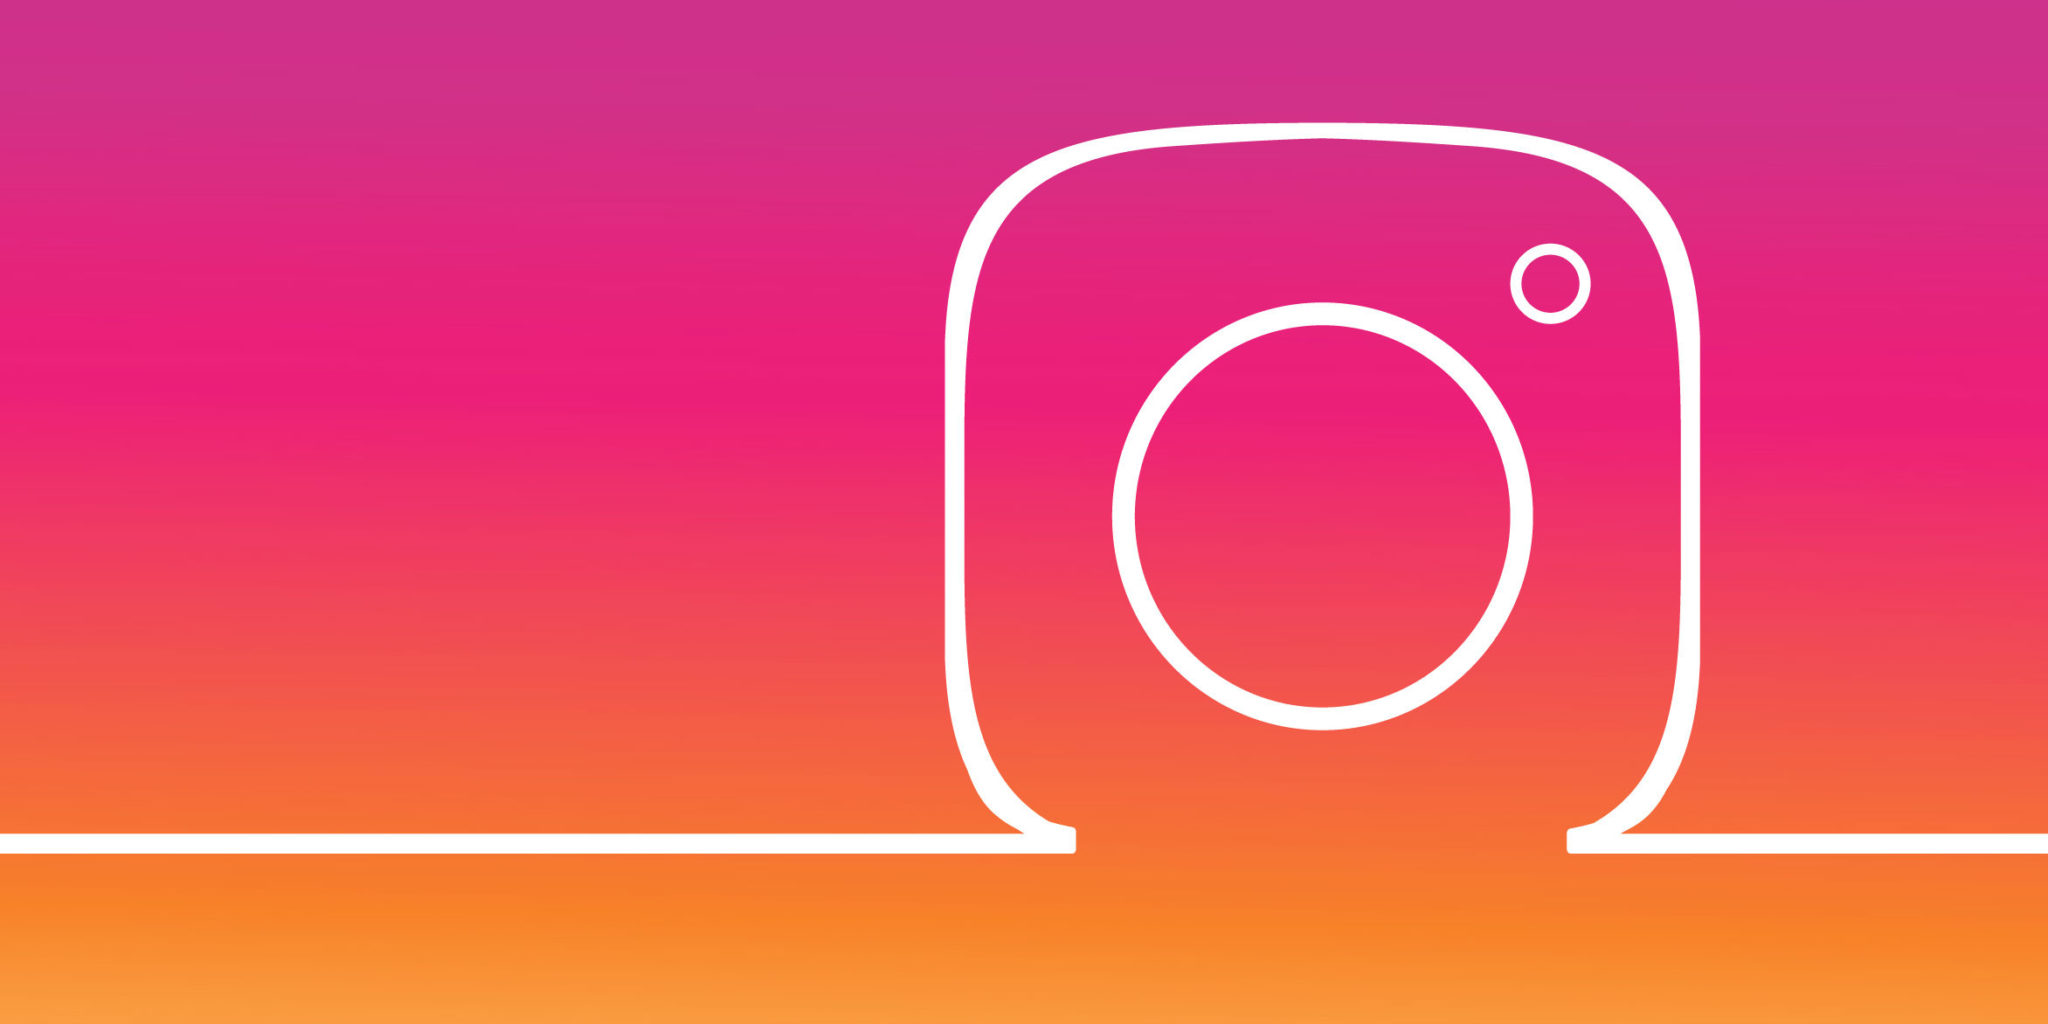 Instagram is adding new tools to help keep bad actors at bay